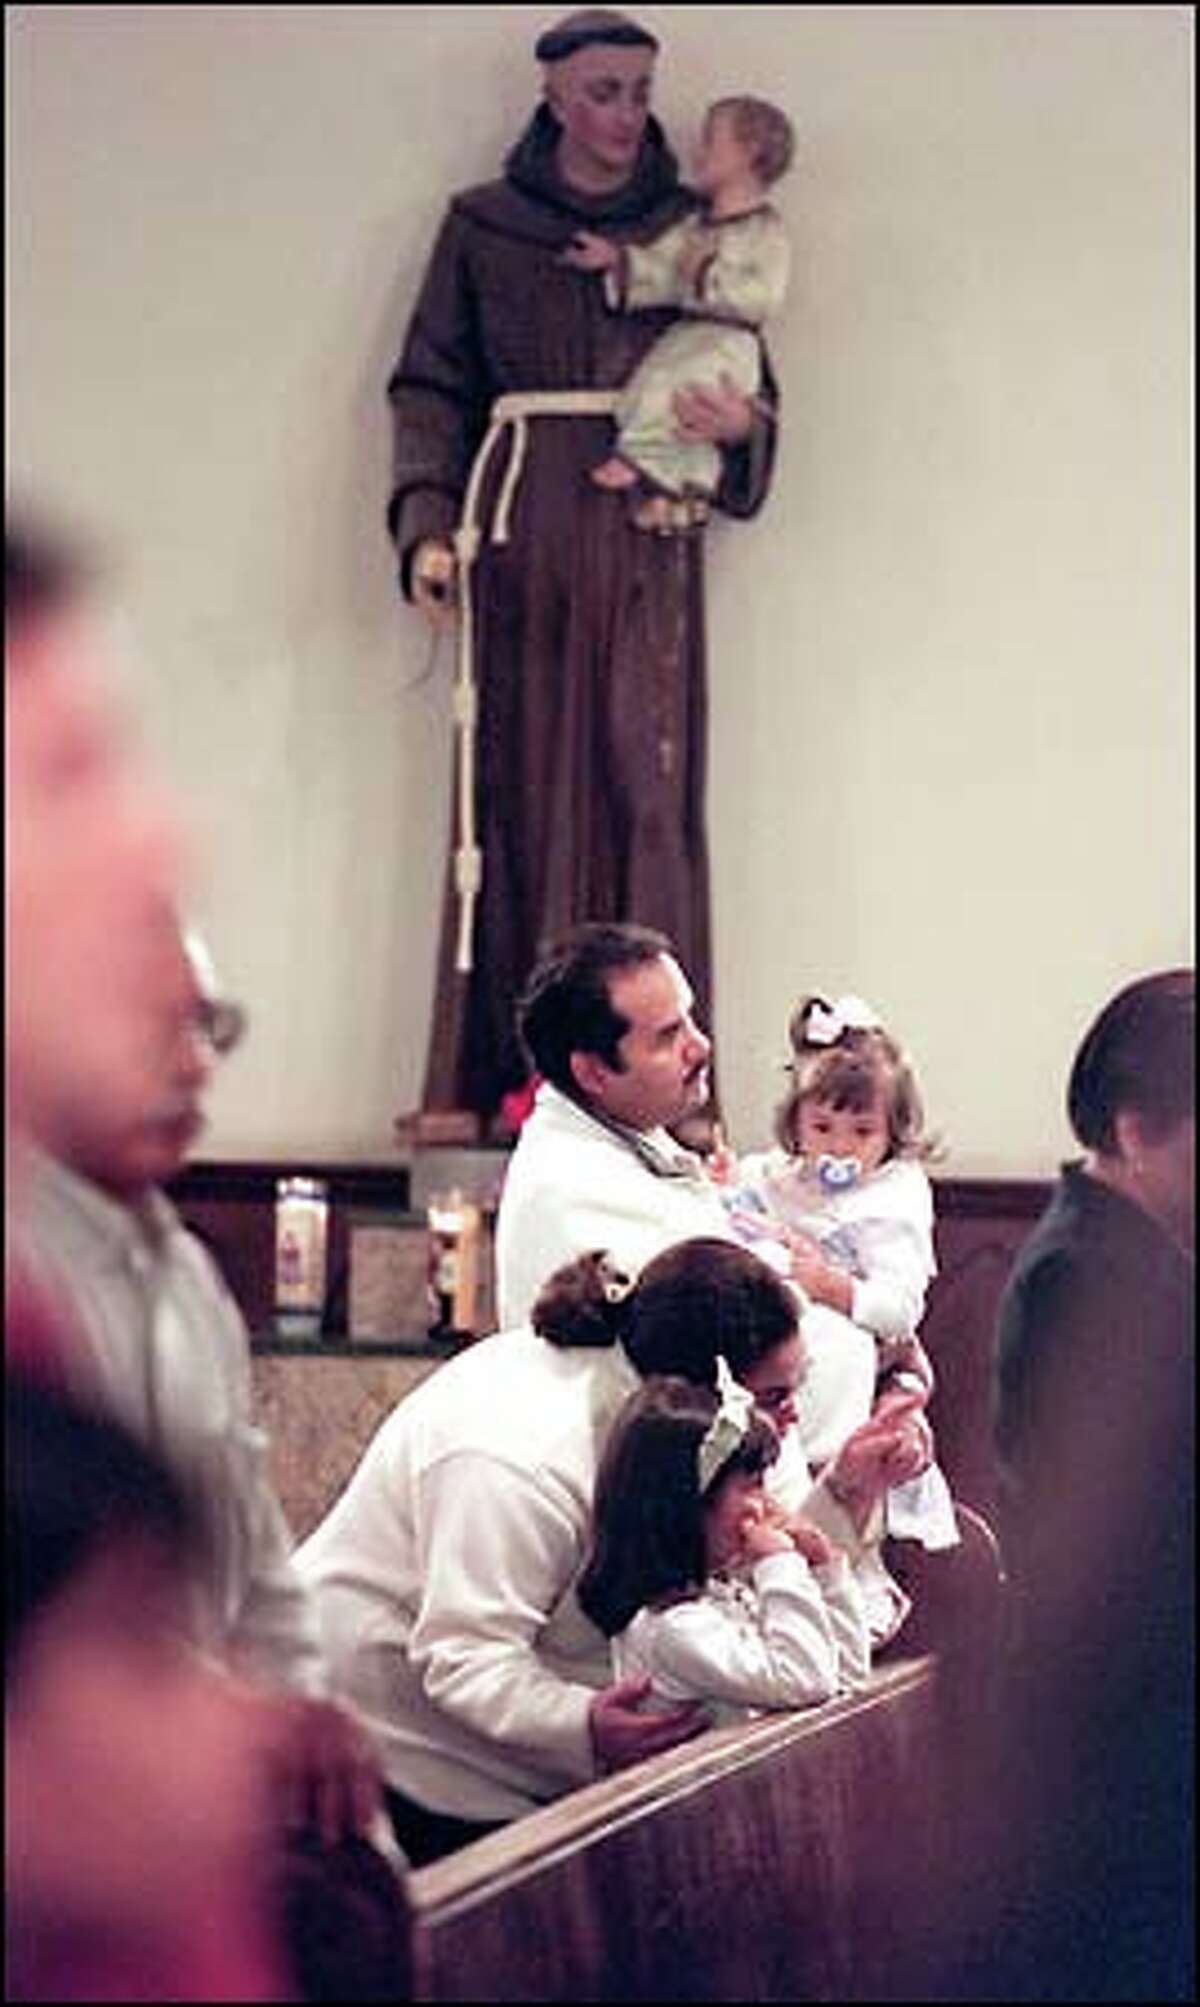 Jose Luis and Marlene Castaneda hold their daughters Manoush, 6, and Maximianne, 1, during their first visit to St. Mary's in the Central District. The Castanedas came to St. Mary's because they had heard it was receptive to Hispanic families.